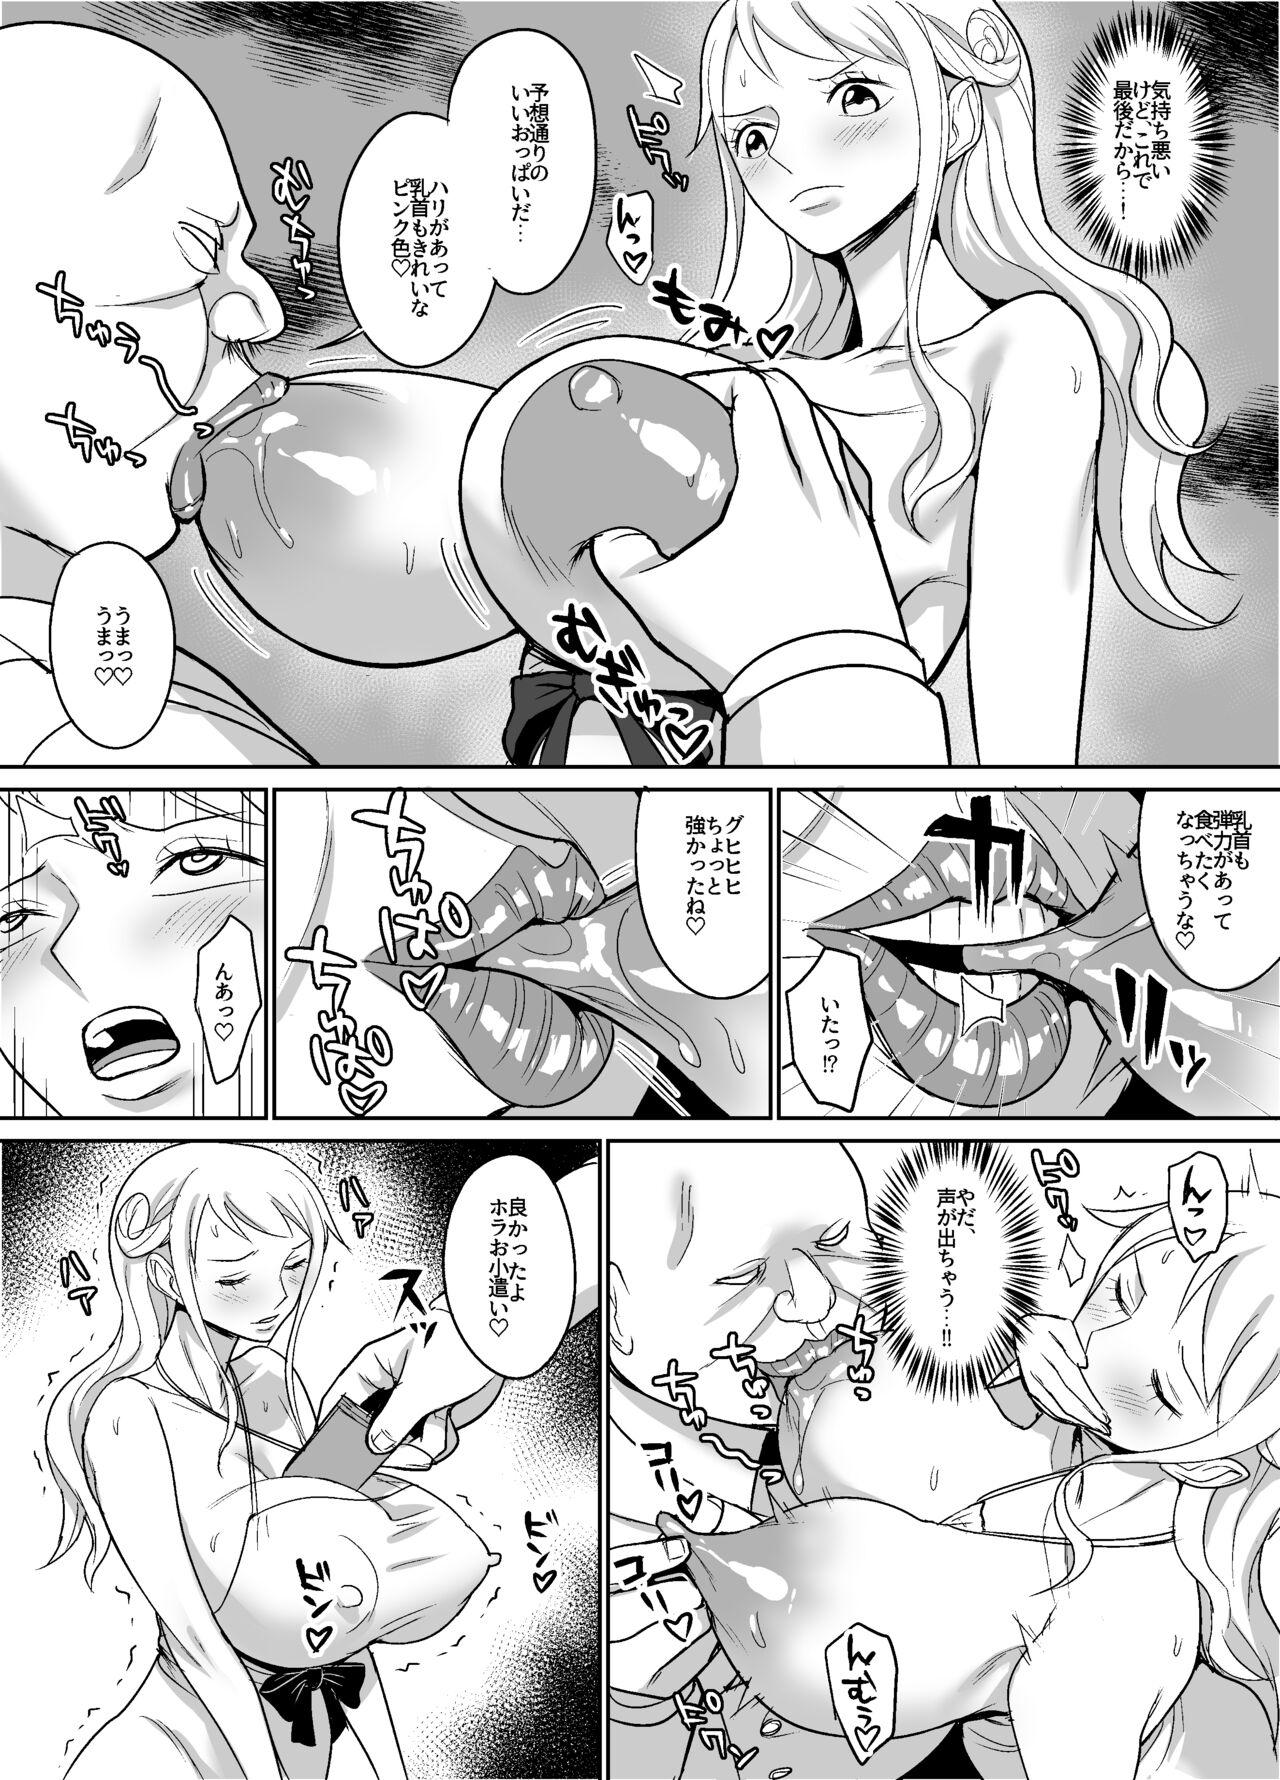 Anal Gape Nami Ver. Gold - One piece Threesome - Page 5